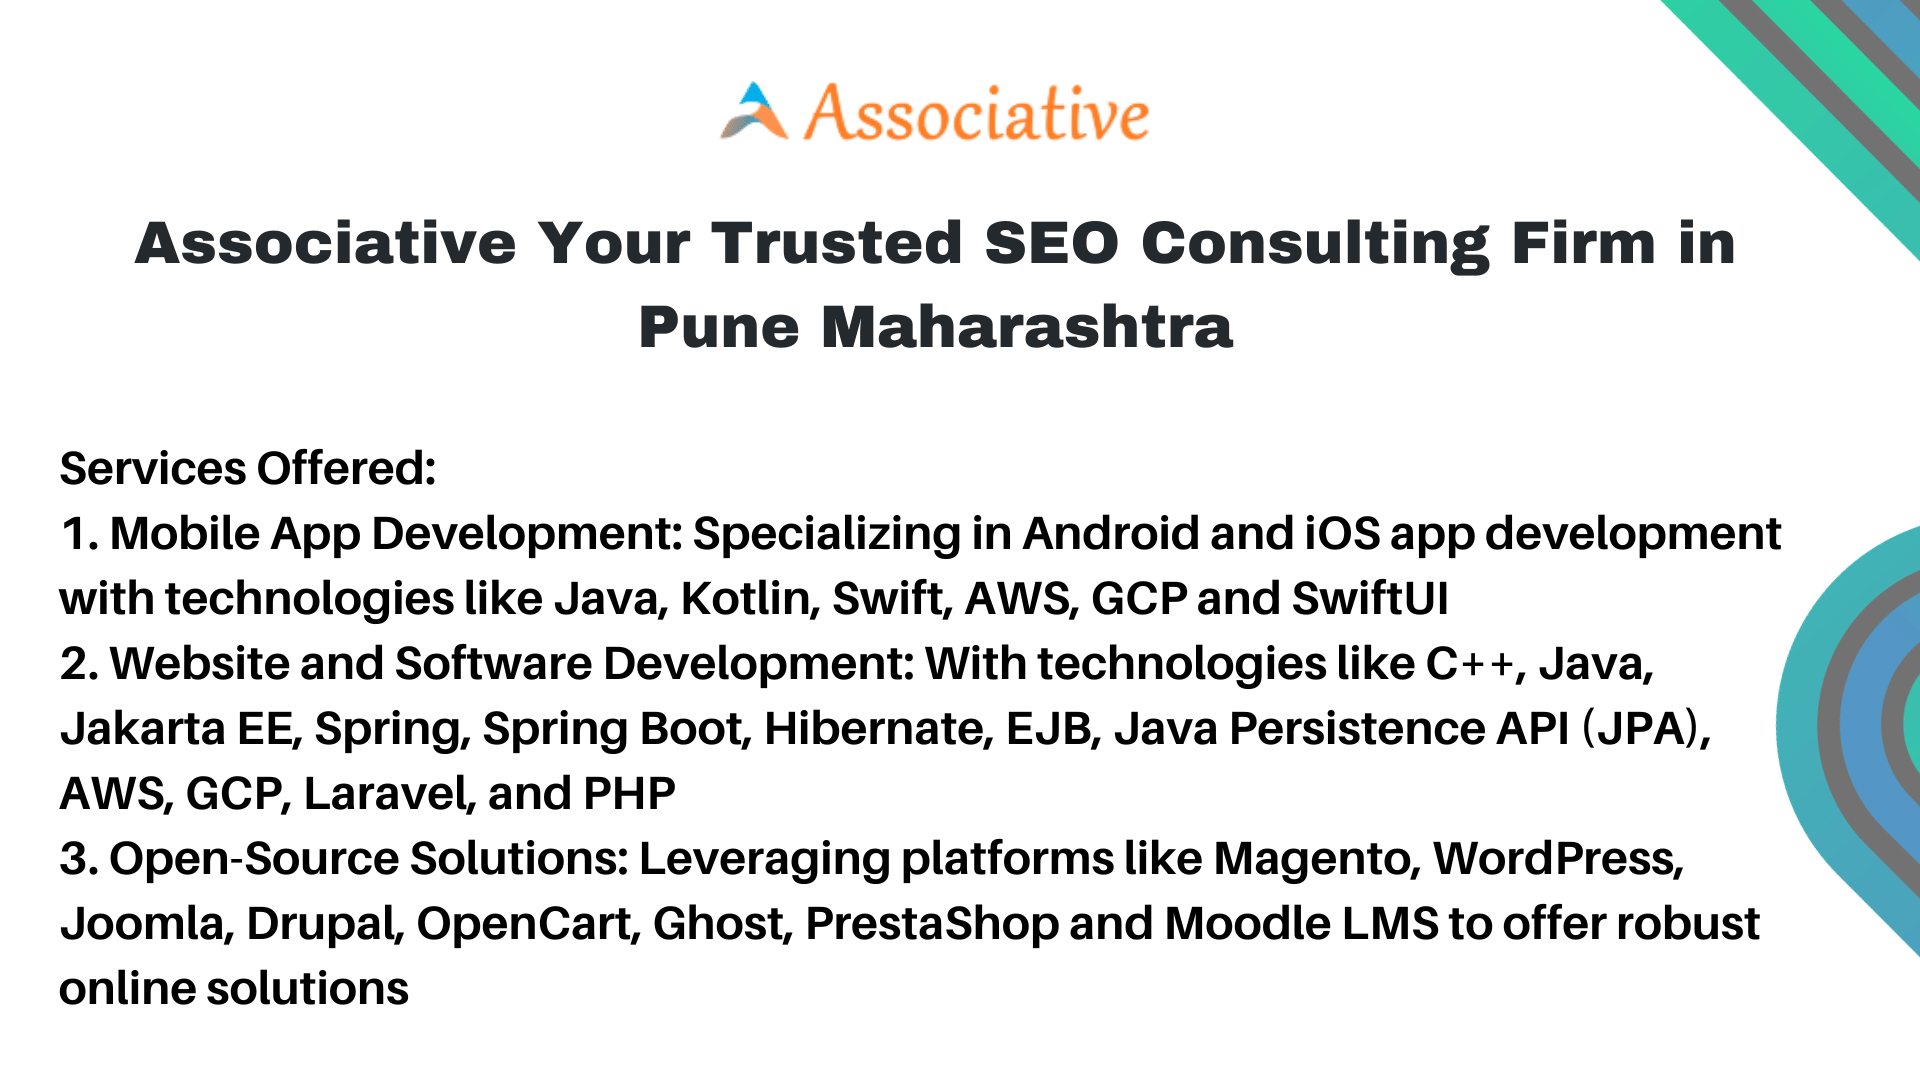 Associative Your Trusted SEO Consulting Firm in Pune Maharashtra